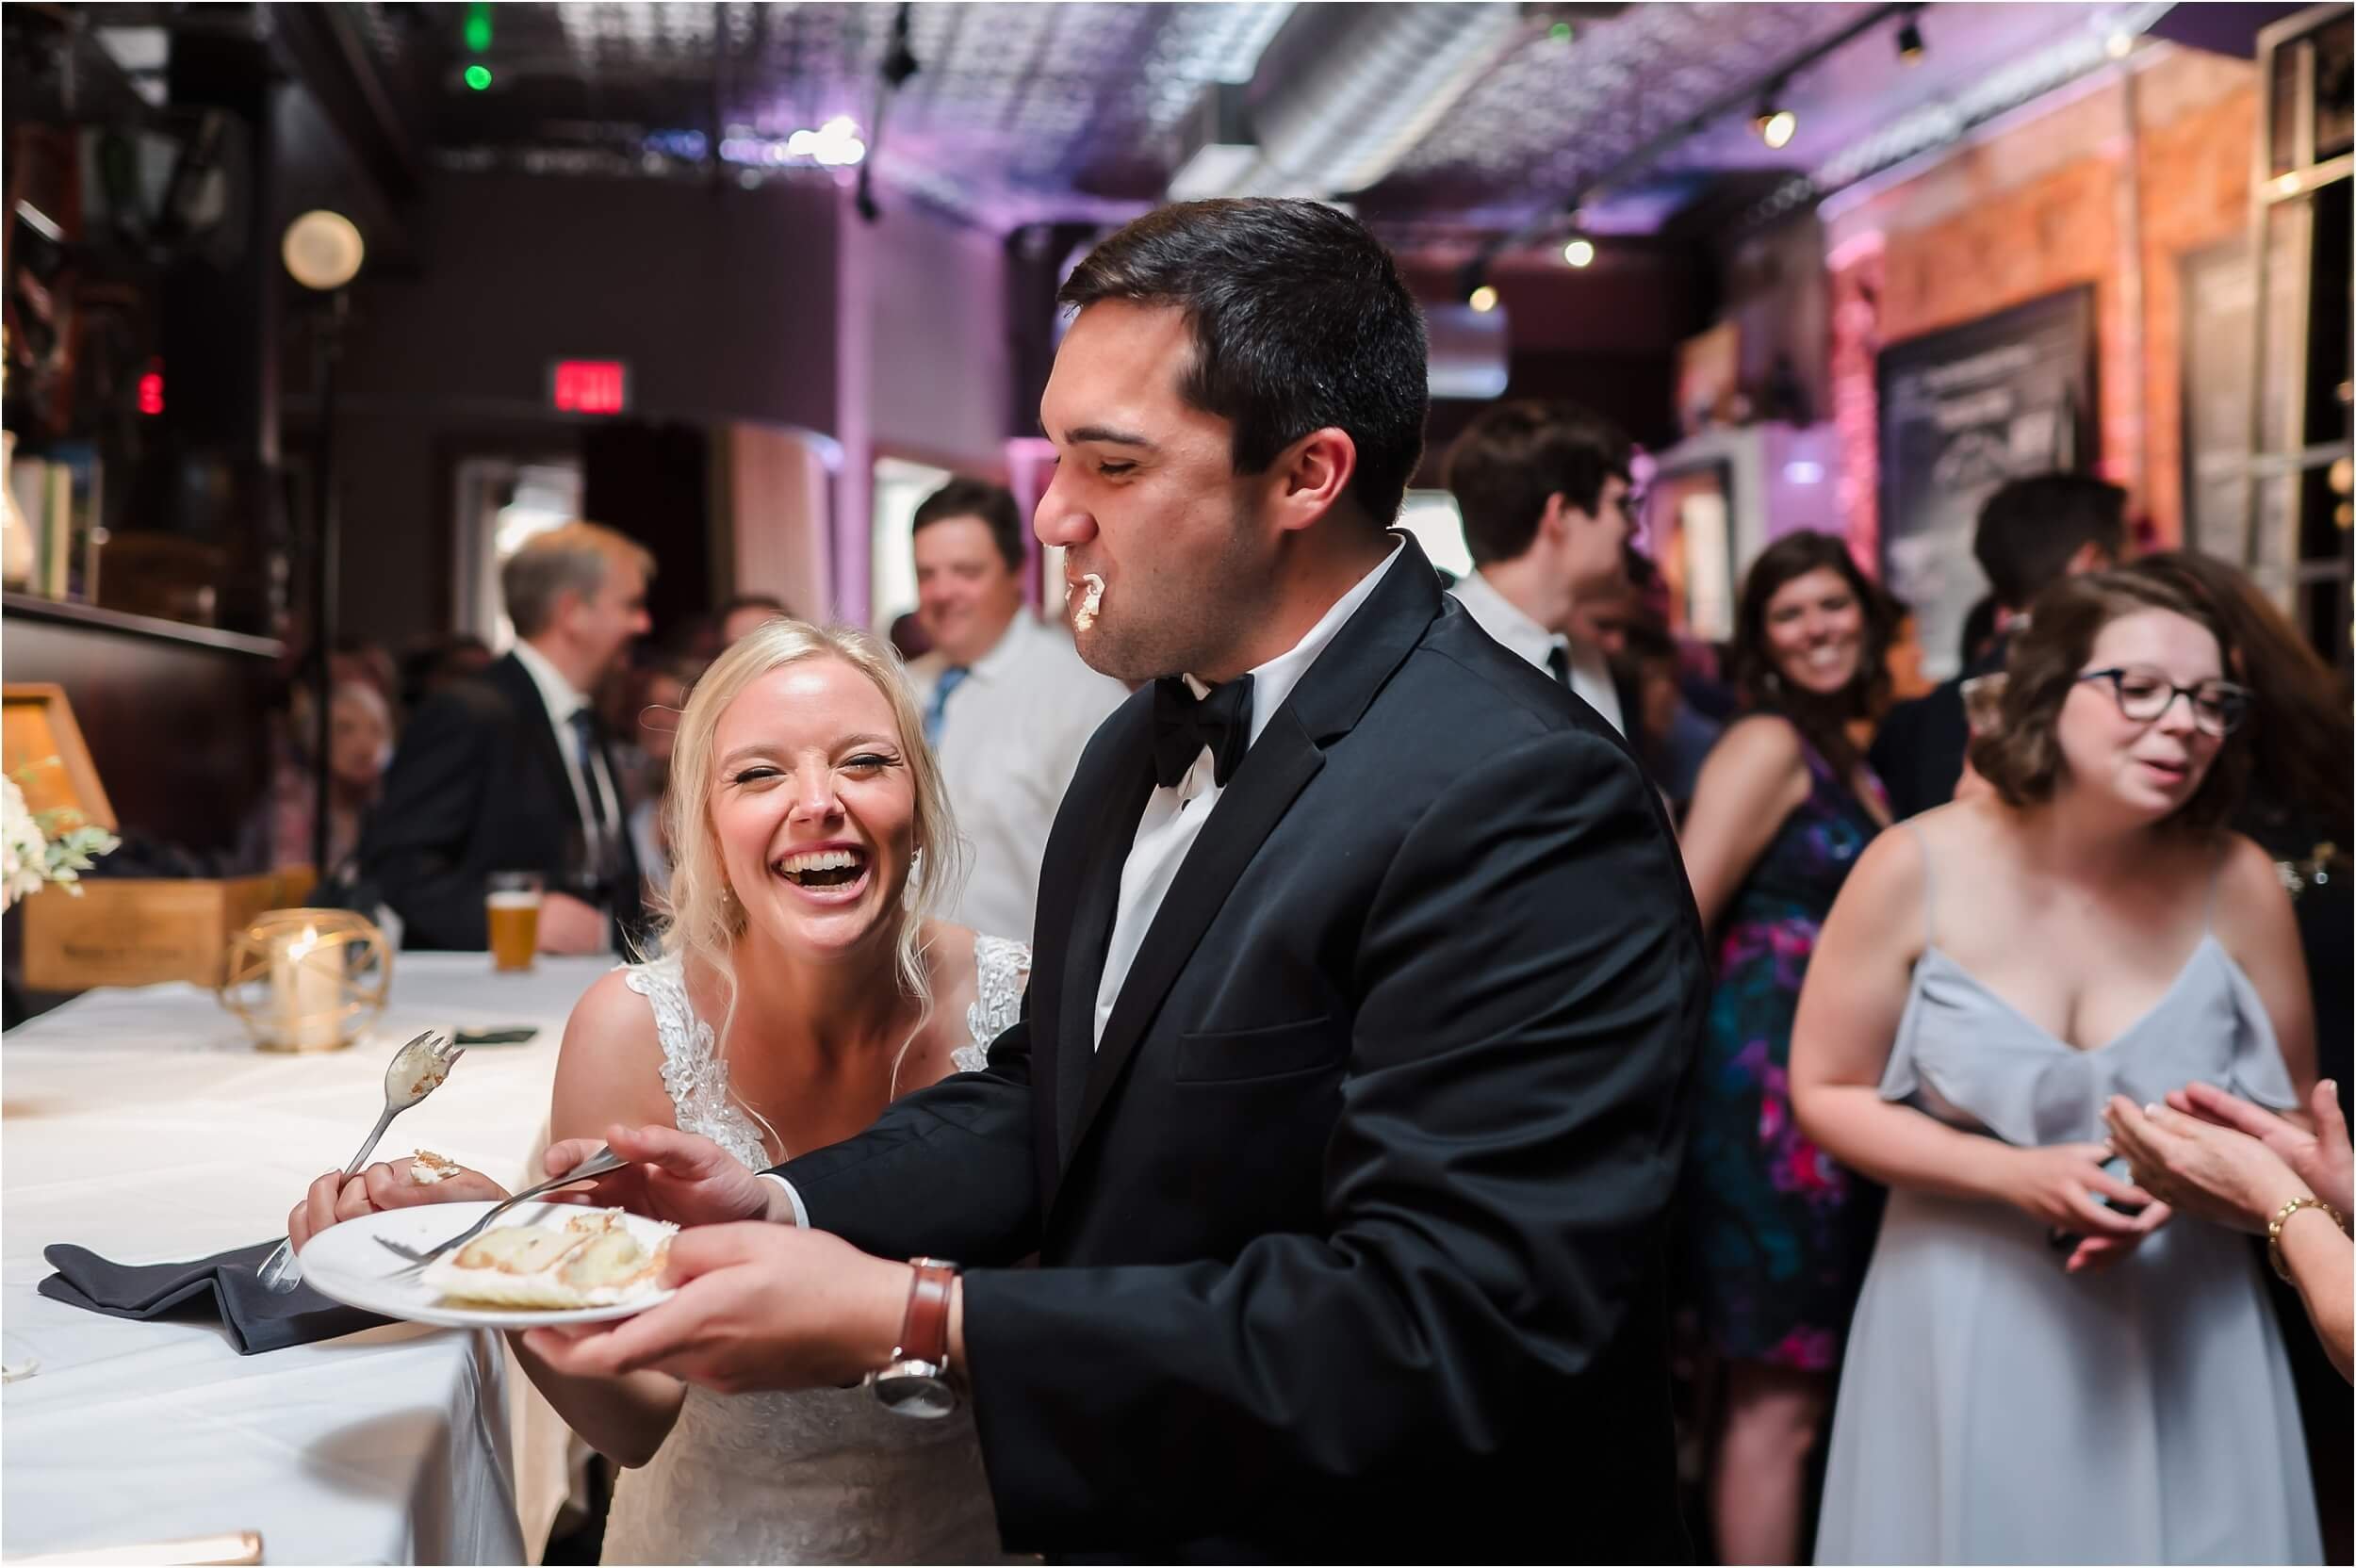  A bride laughs towards the camera after accidentally getting cake on the groom’s face.  